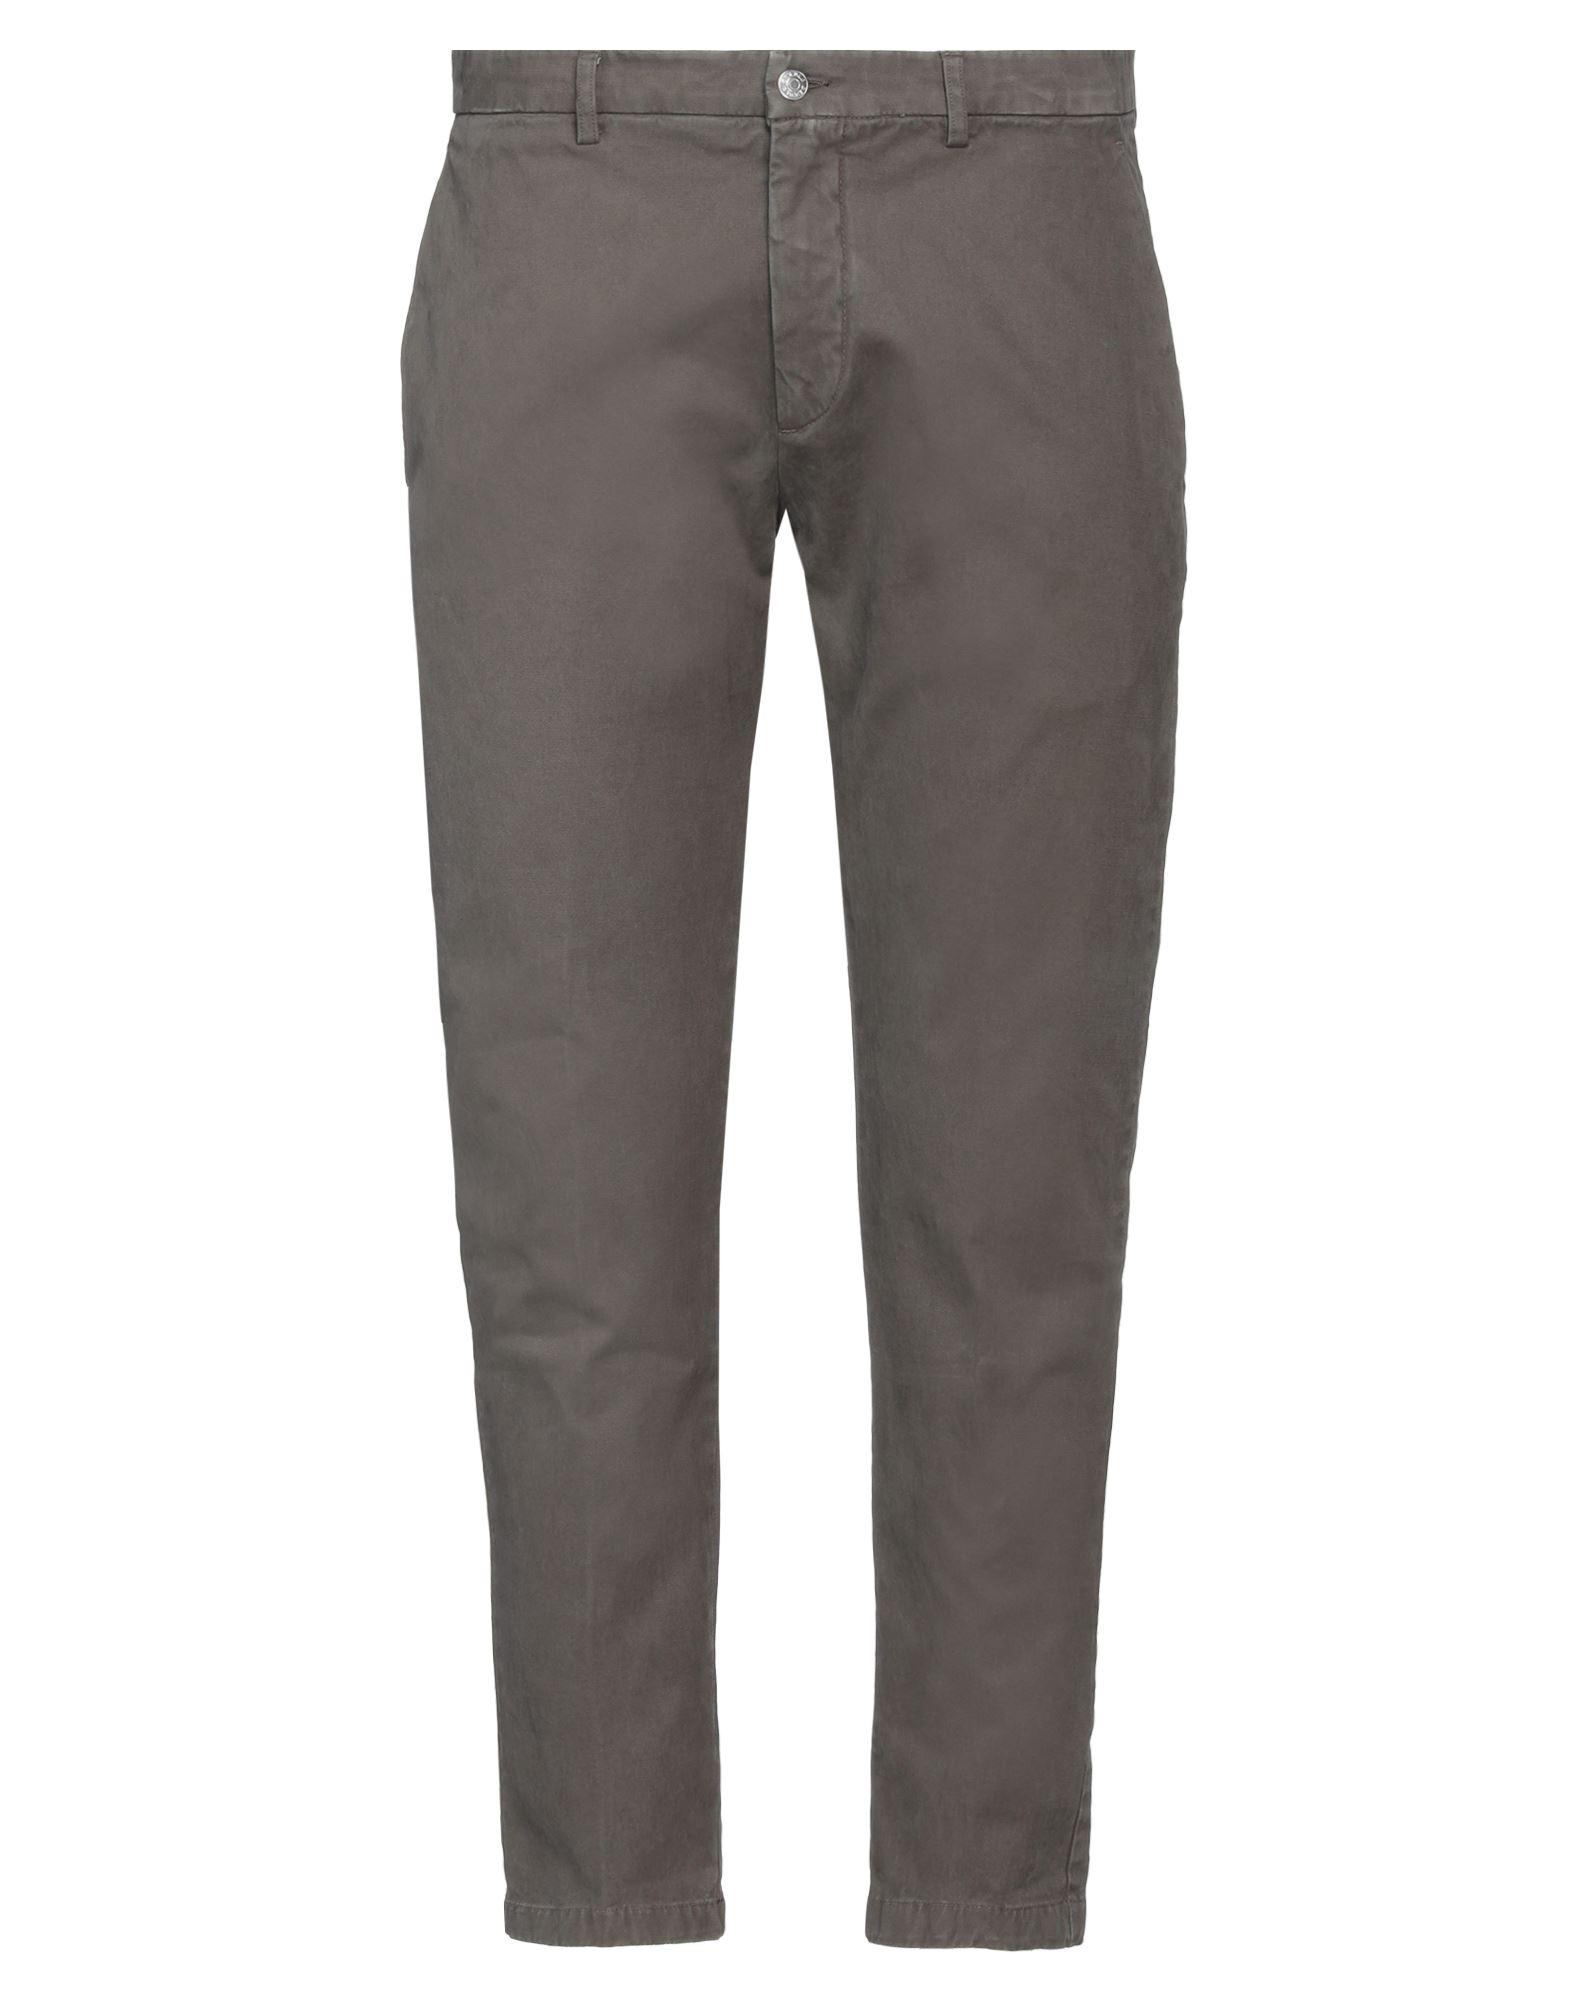 Be Able Man Pants Lead Size 30 Cotton, Elastane In Grey